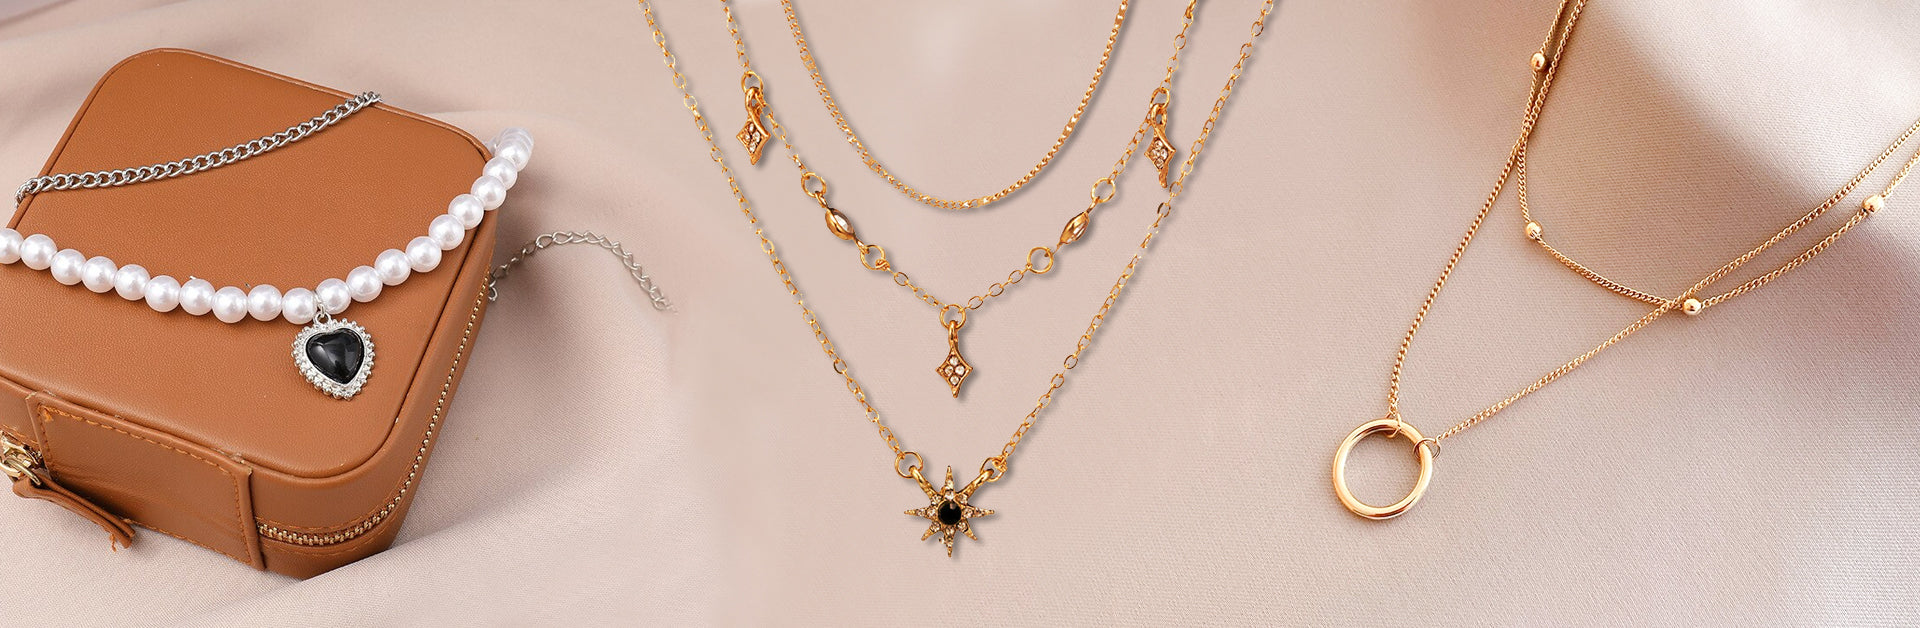 Essential Guidance and Tips: How to layer necklaces to become a pro? –  Angel Barocco